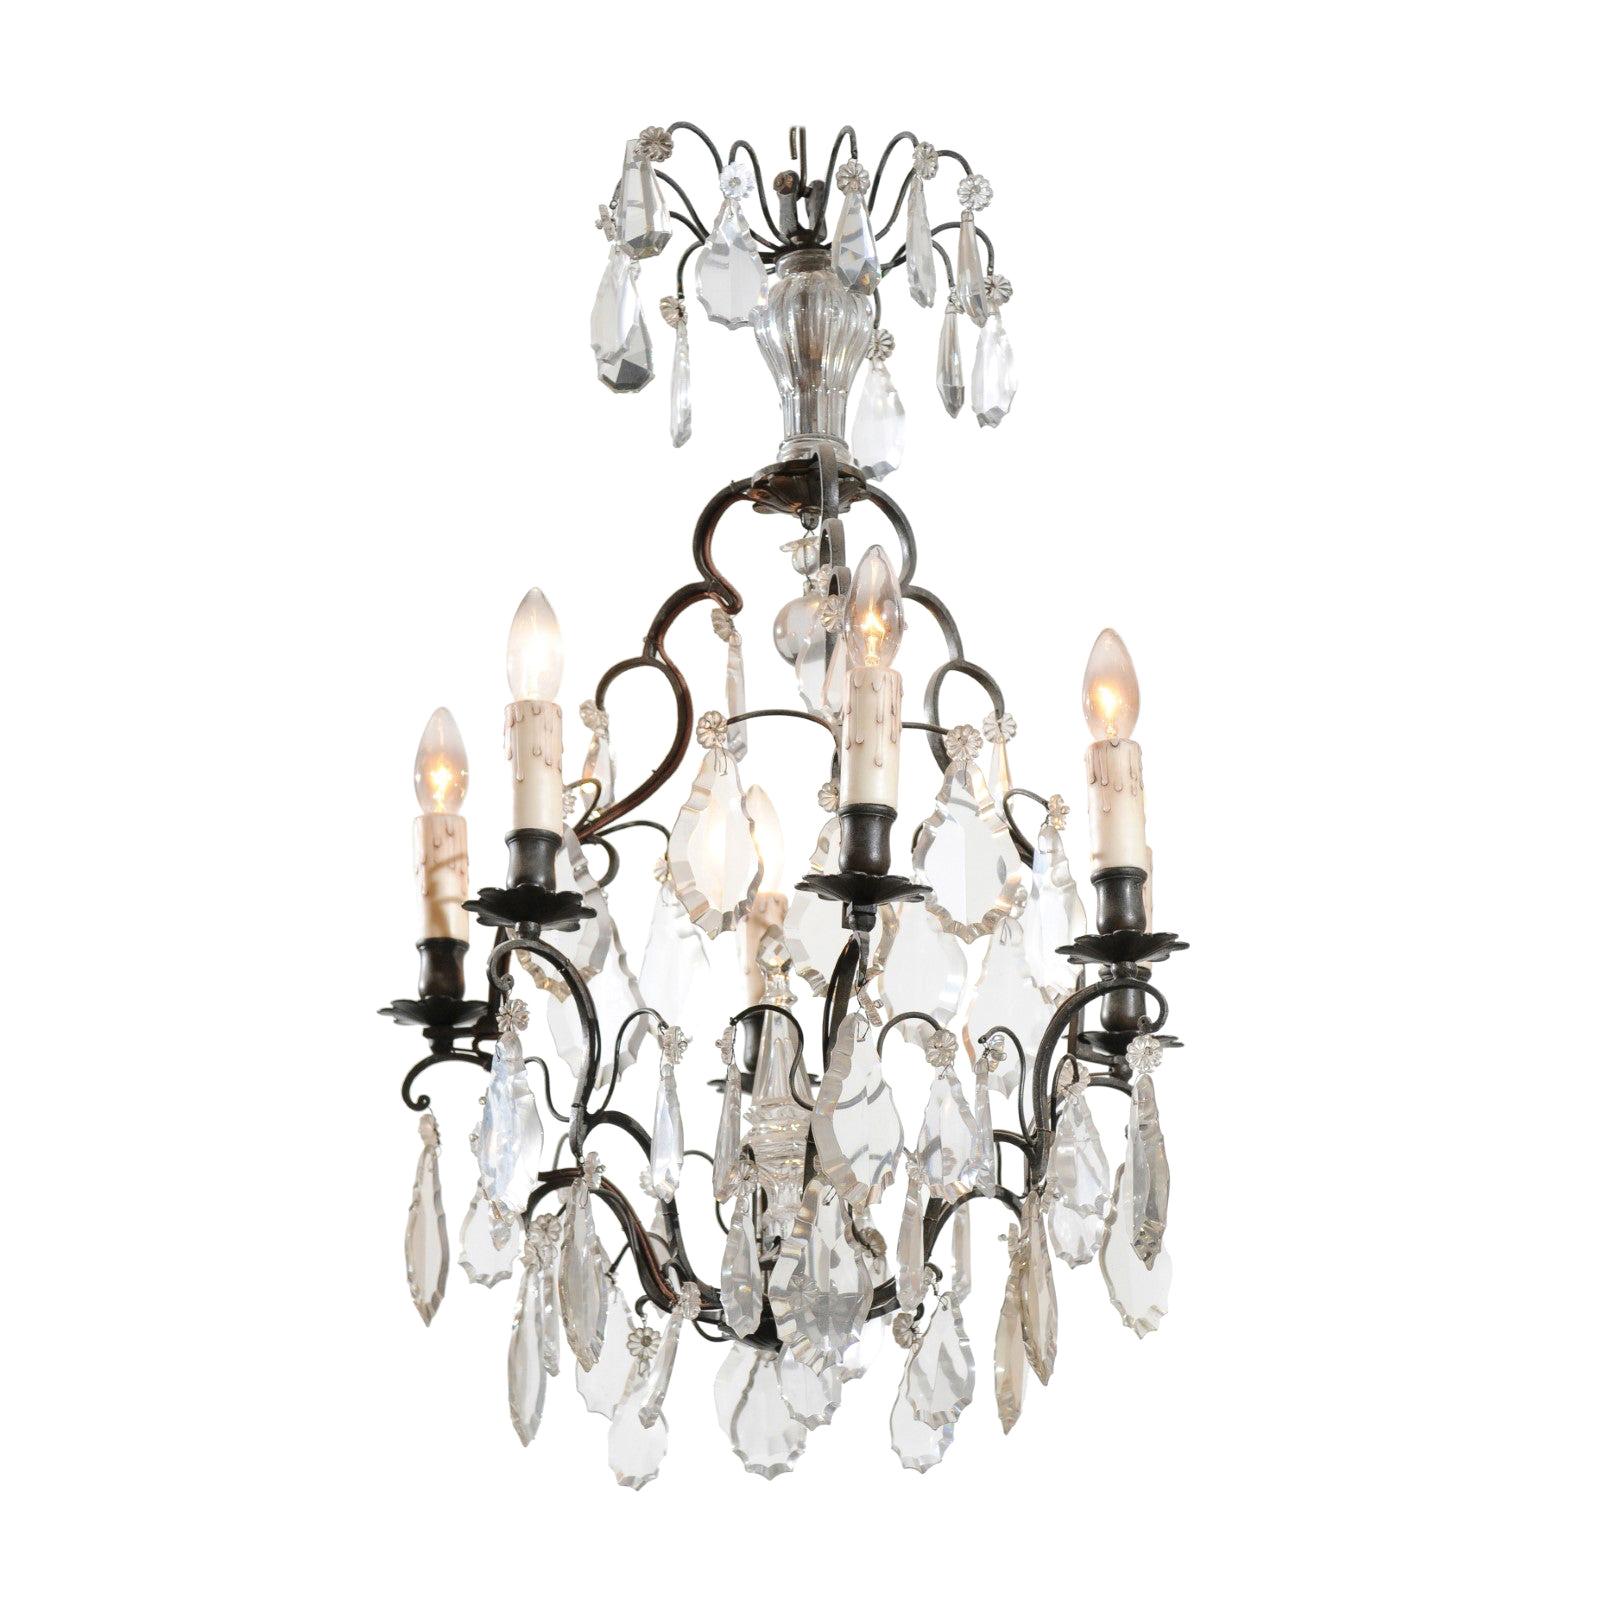 French 19th Century Crystal Six-Light Chandelier with Iron Armature and Obelisk